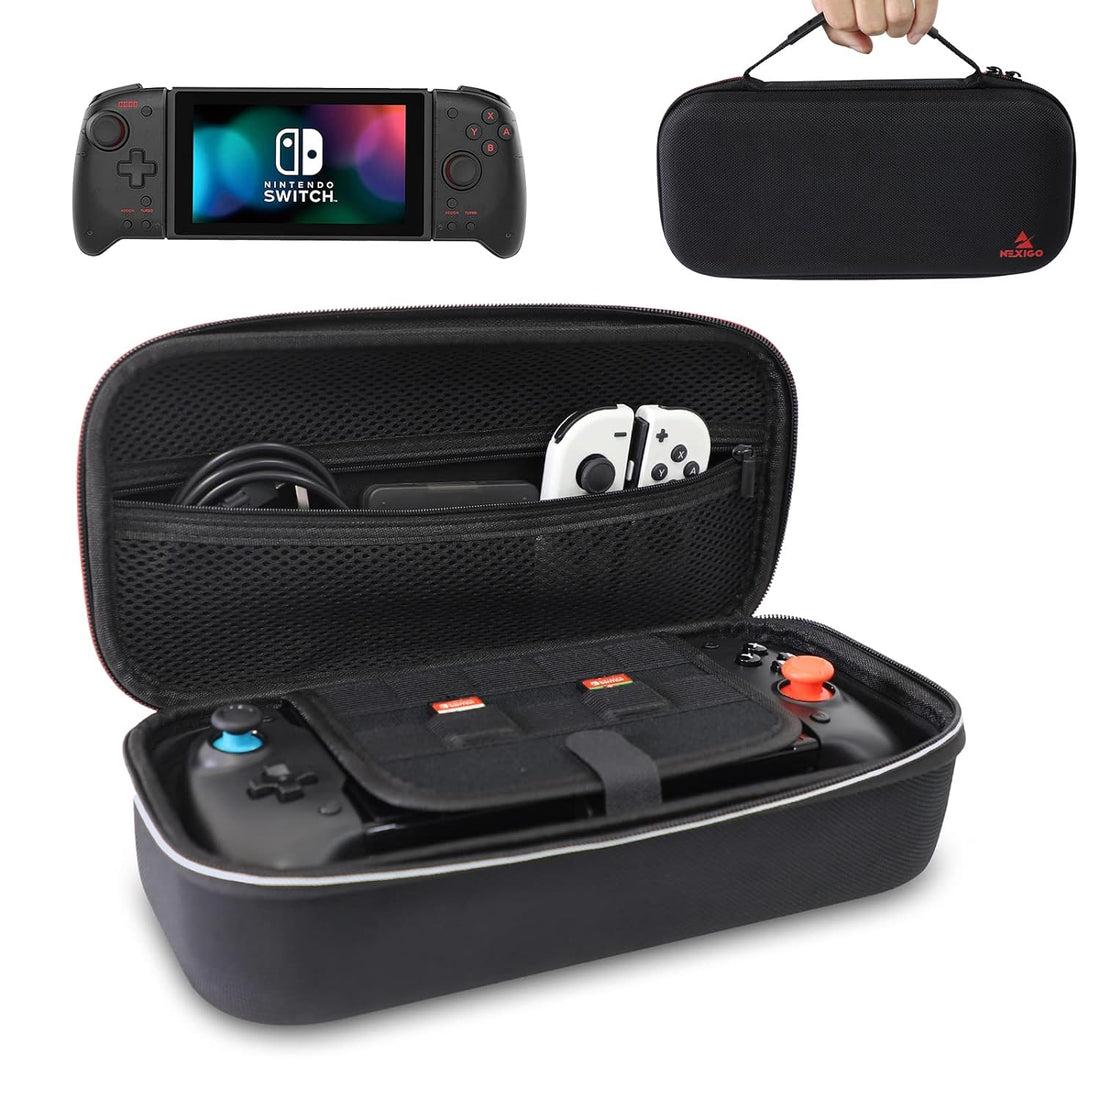 NexiGo Switch Controller Carrying Case for Nintendo Switch, Game Storage Case with 10 Game Card Holders, Compatible with Gripcon, Joy-Cons and Accessories